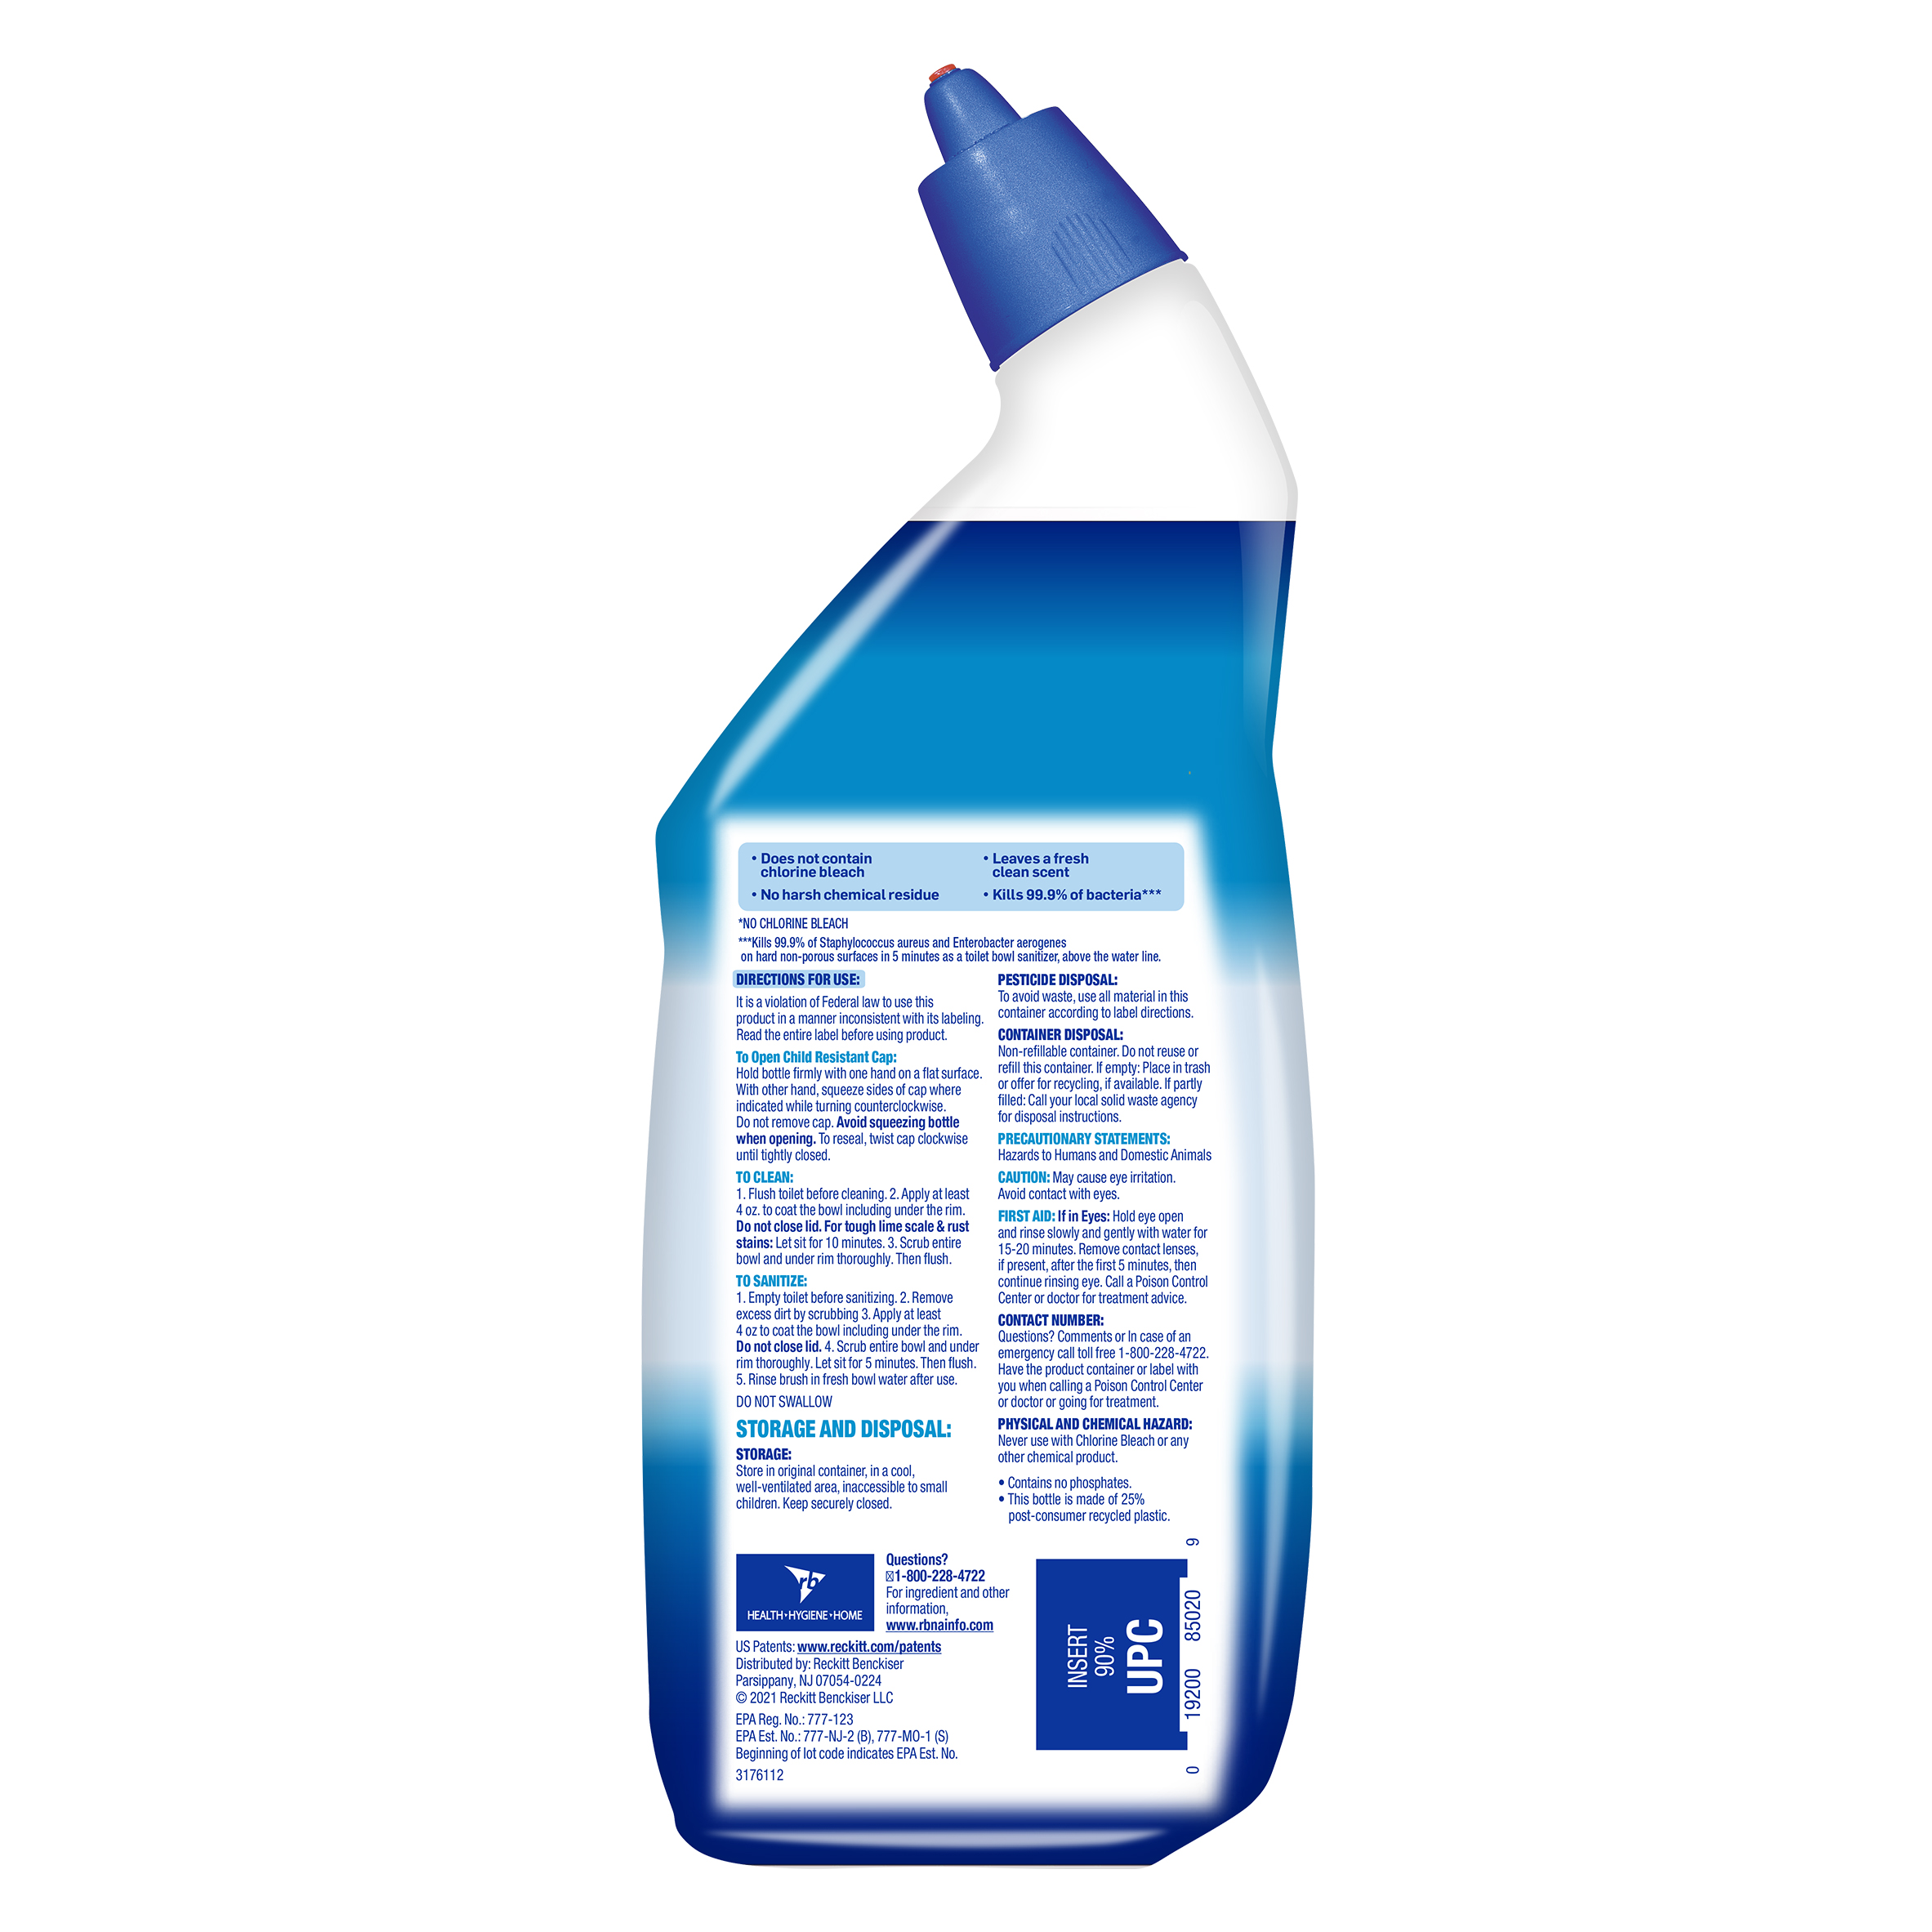 Lysol Toilet Bowl Cleaner Gel, For Cleaning and Disinfecting, Bleach Free (Contains Hydrogen Peroxide), Cool Spring Breeze Scent, 24oz (Pack of 2) - image 2 of 6